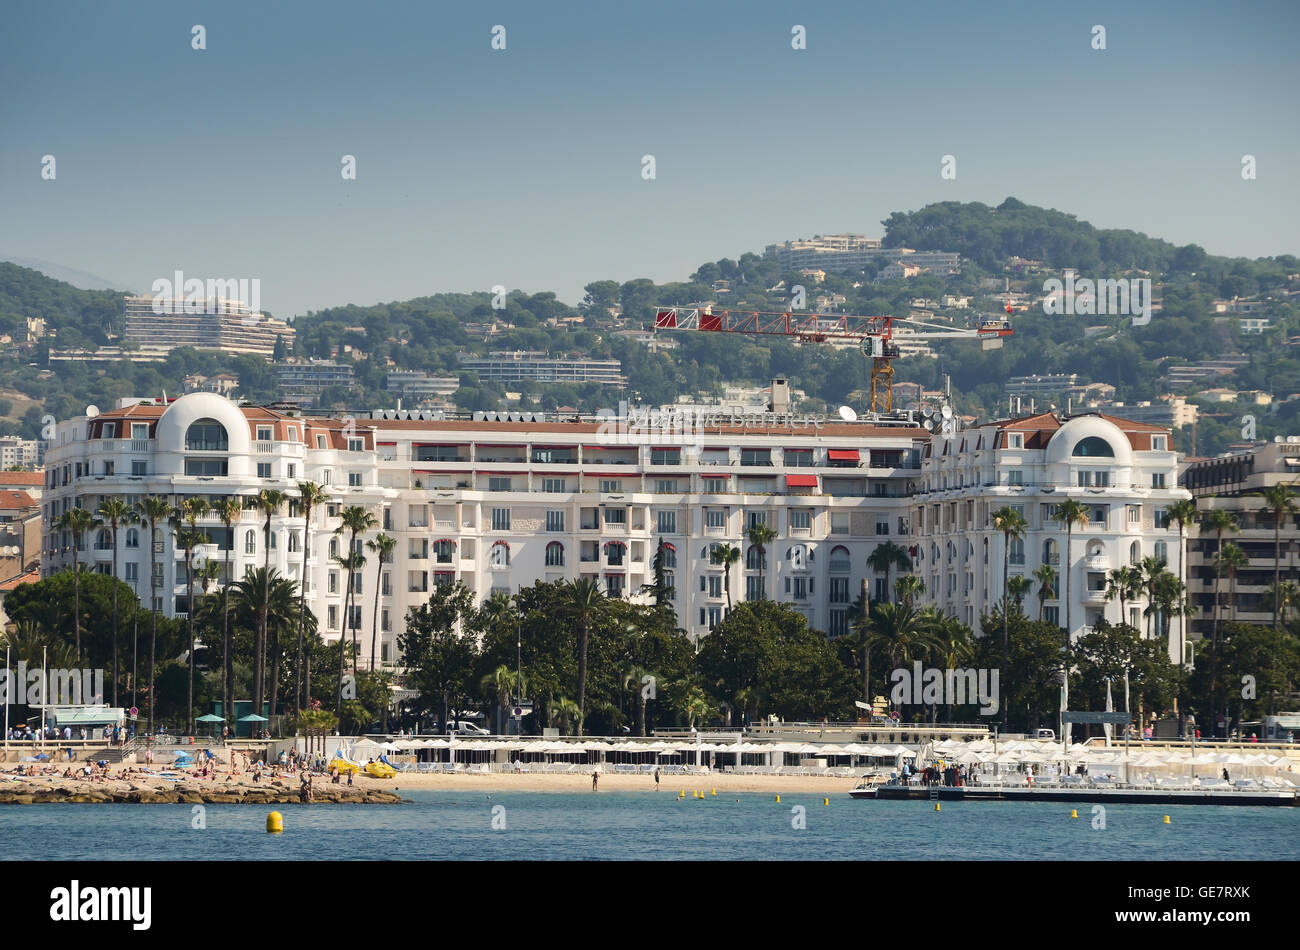 Luxury hotel "Inter Continental Carlton" (343 rooms, built in 1911), located on the famous "La Croisette" Boulevard in Cannes, Stock Photo